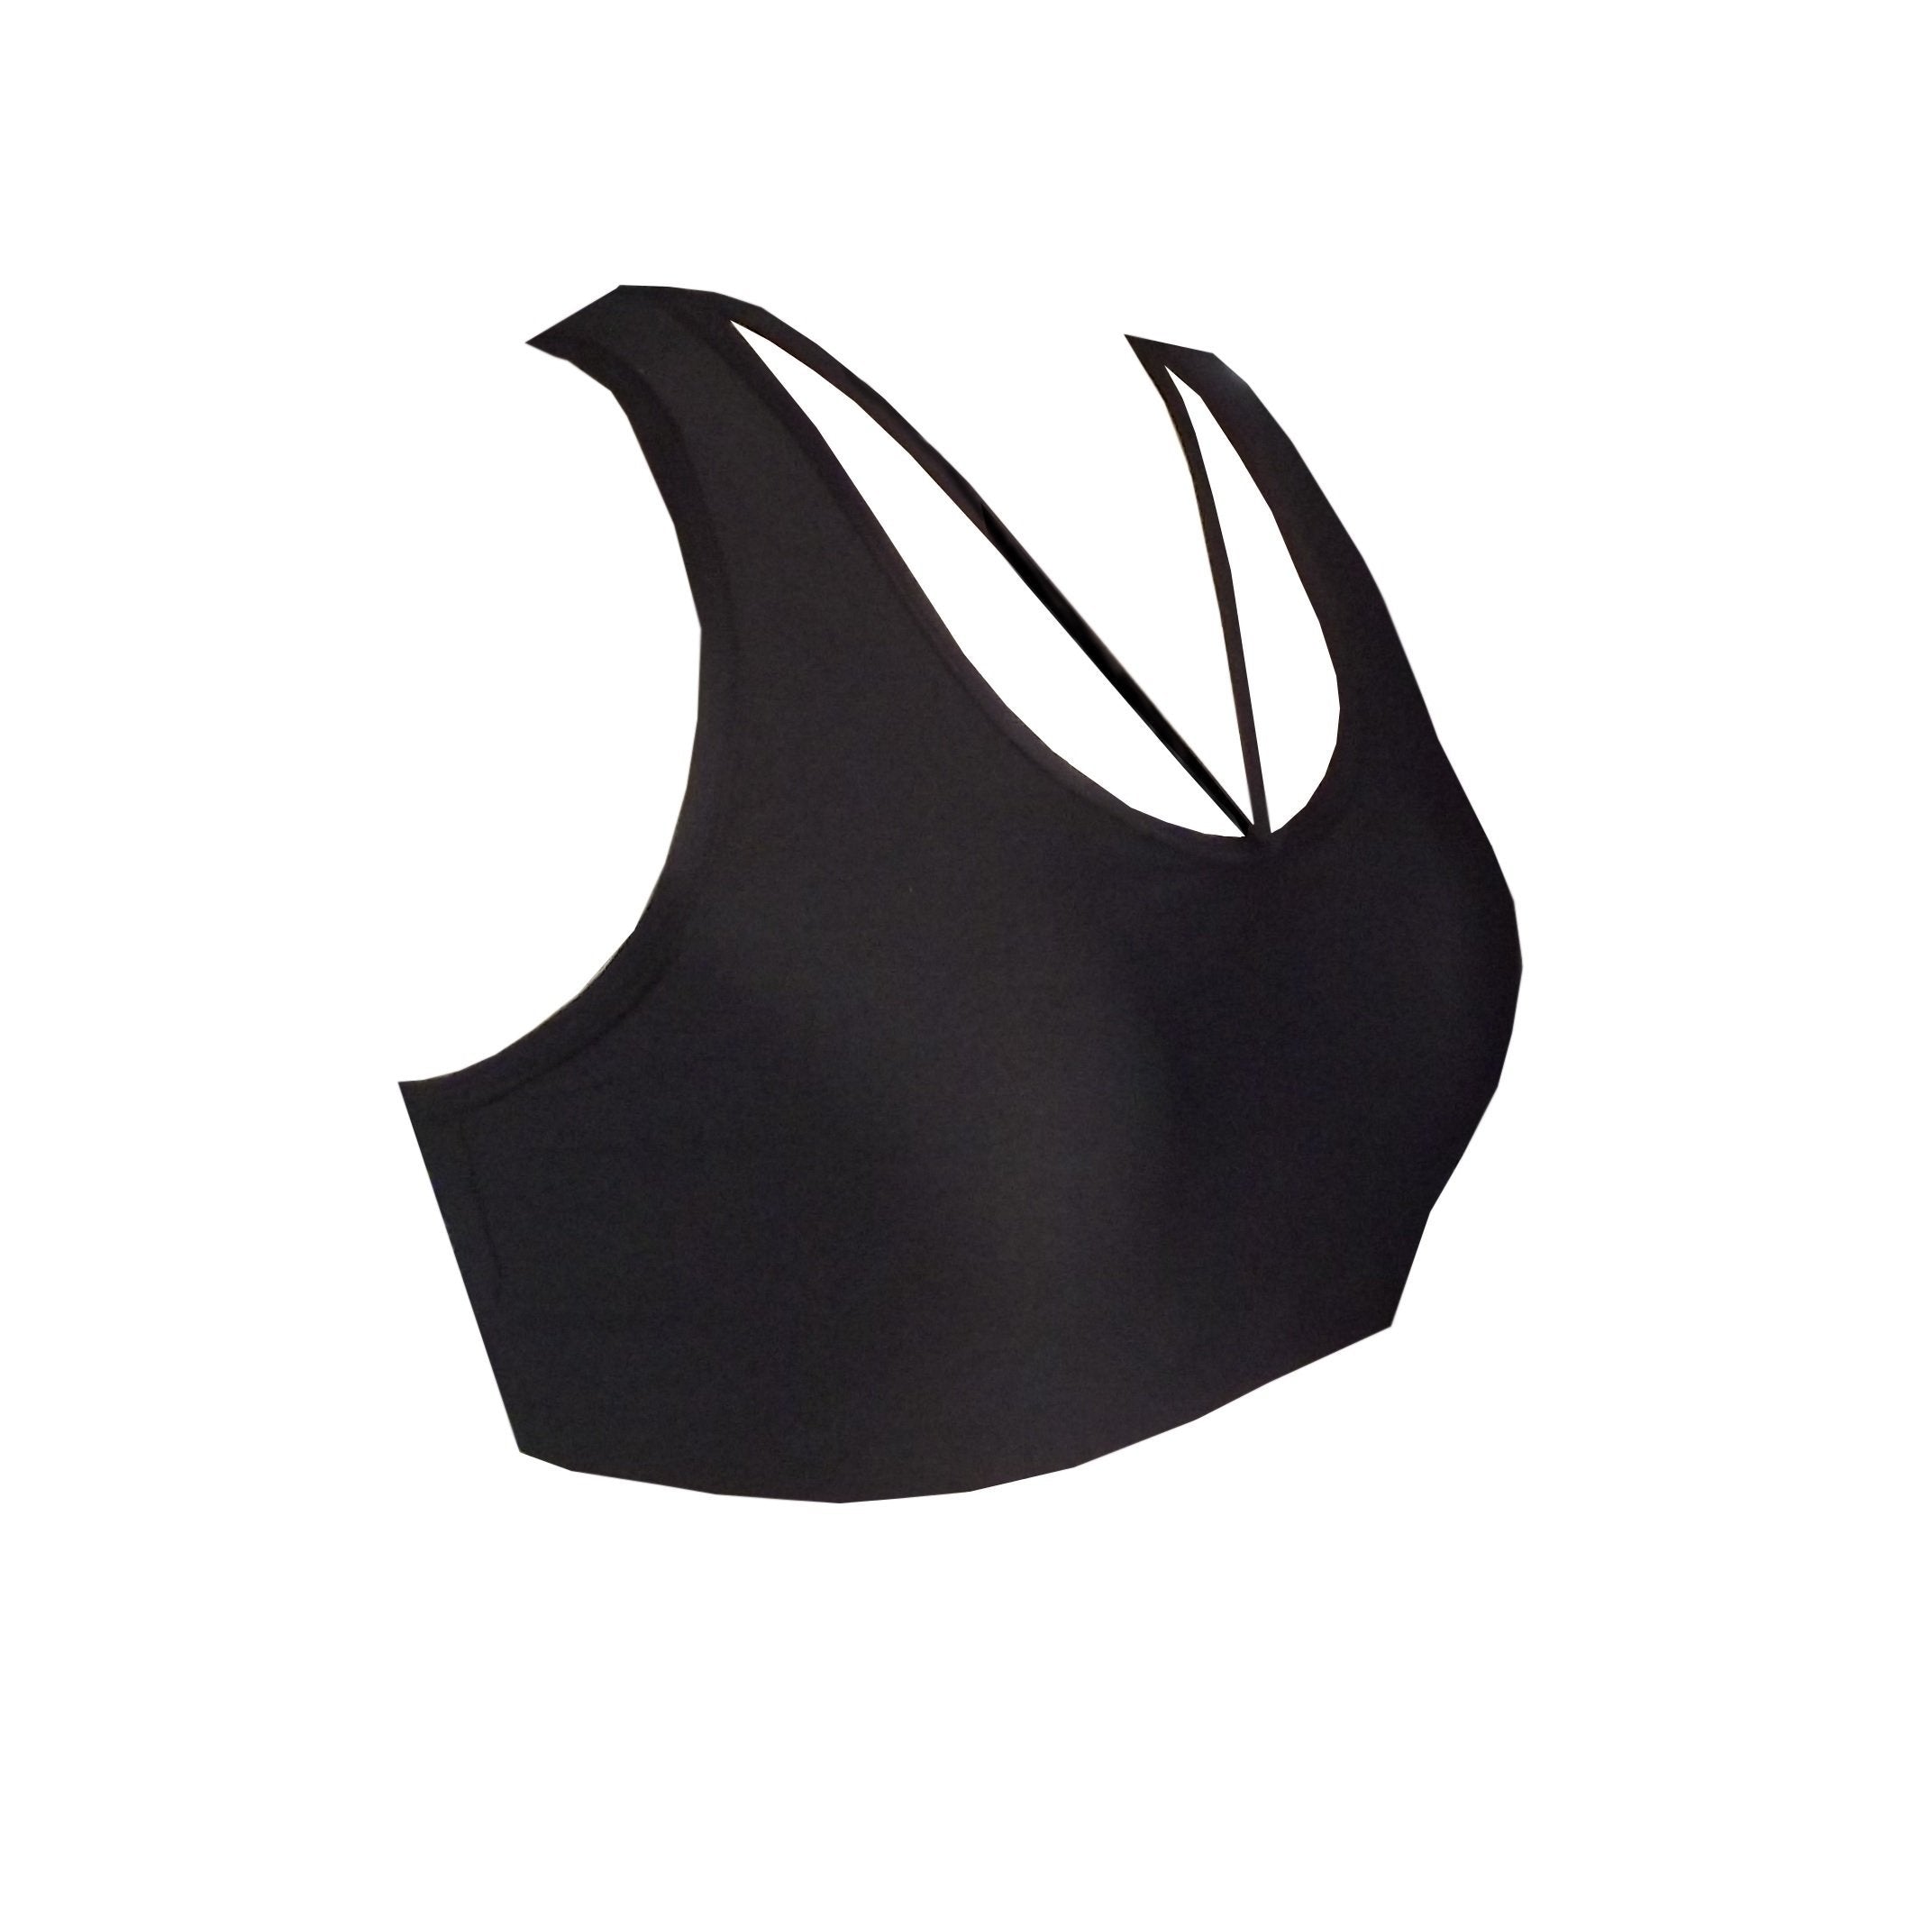 Scallop Back Strappy Sports Crop Top BK74 - Be Activewear